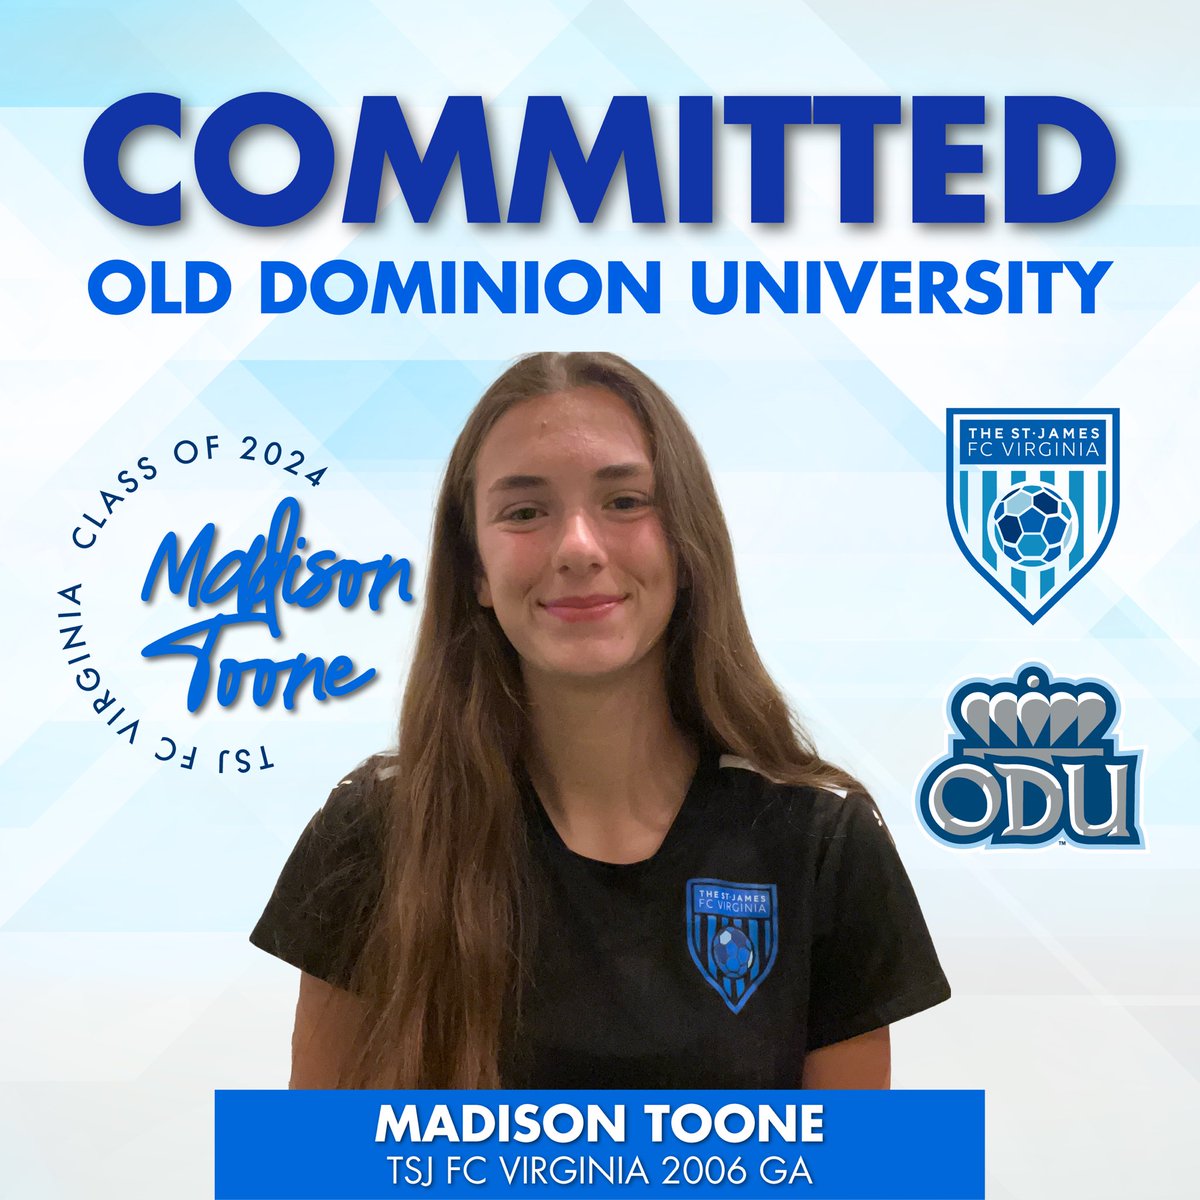 🚨Special congratulations to Madison Toone. She has committed to play soccer at Old Dominion University @ODU 😎Your future is bright Madison - we are happy to share your news! 🤩 @ODUWomensSoccer